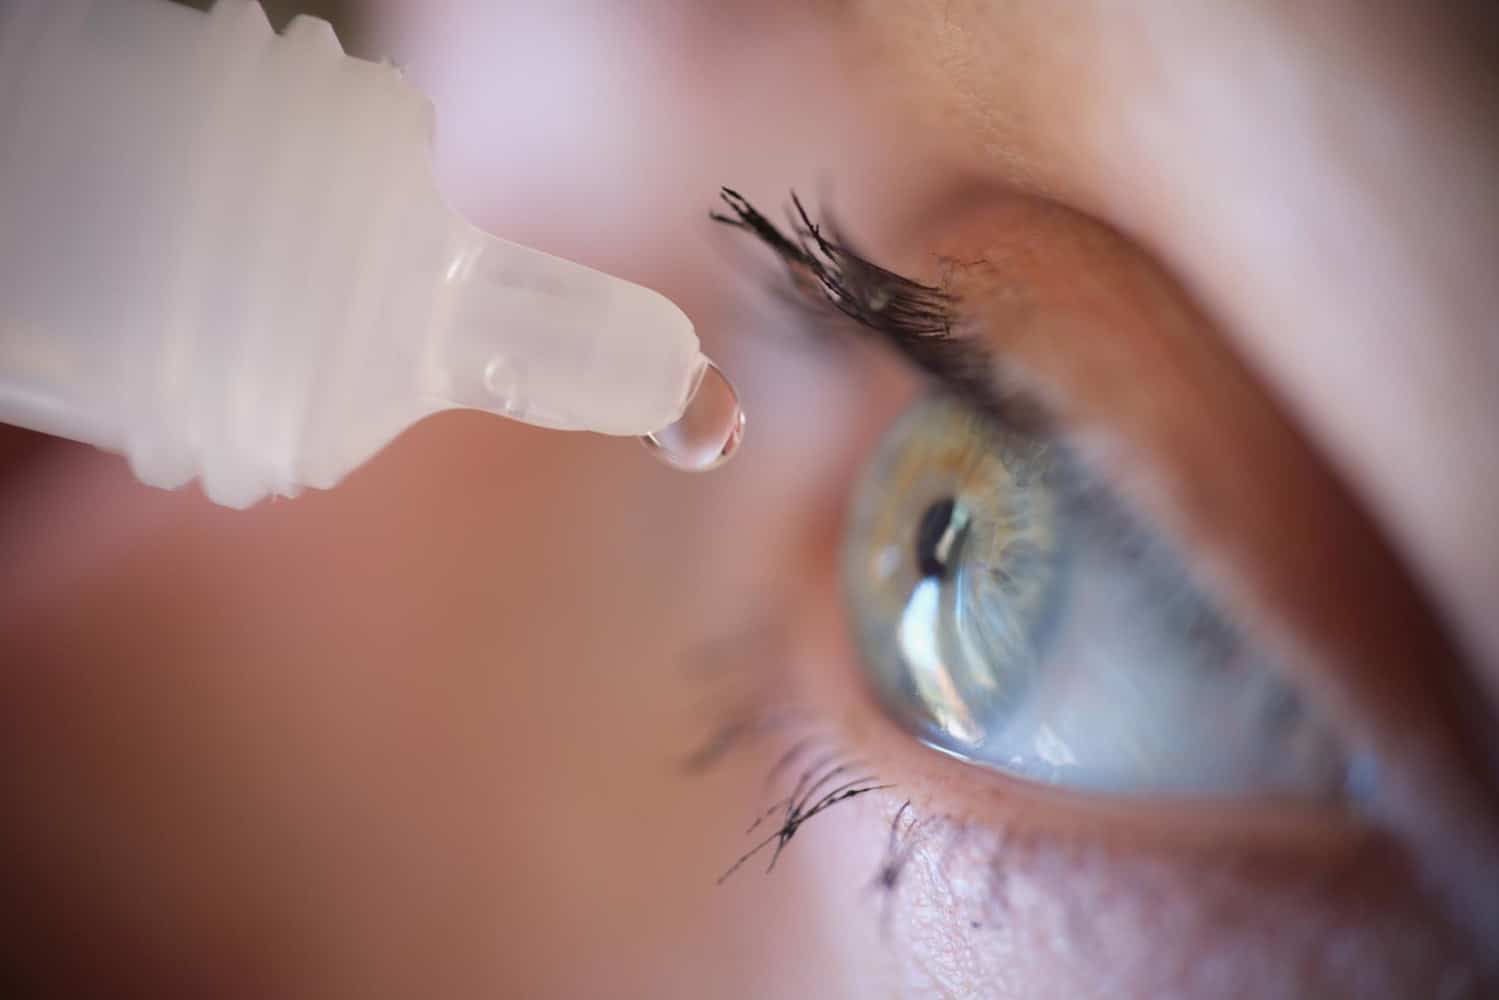 Woman dripping eye drop into her eyes